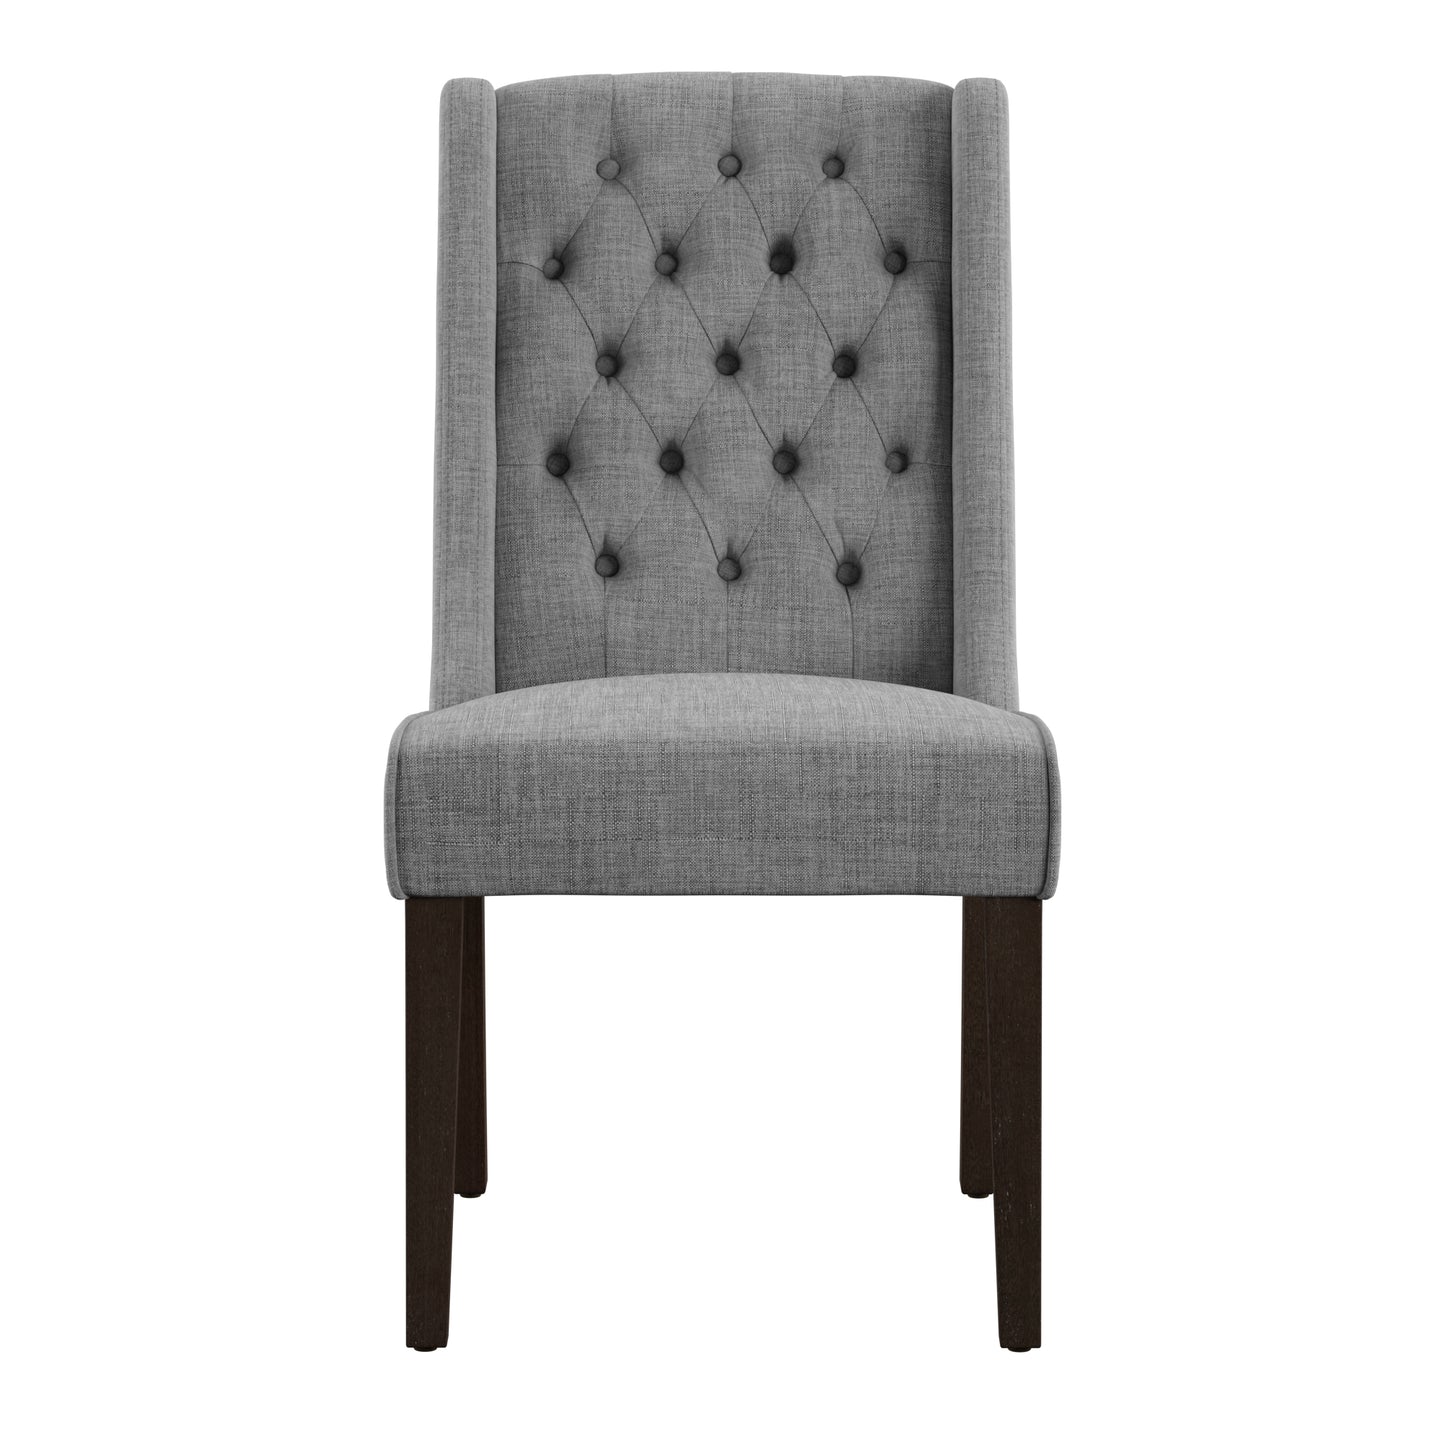 Linen Tufted Wingback Dining Chairs (Set of 2) - Espresso Finish, Grey Linen